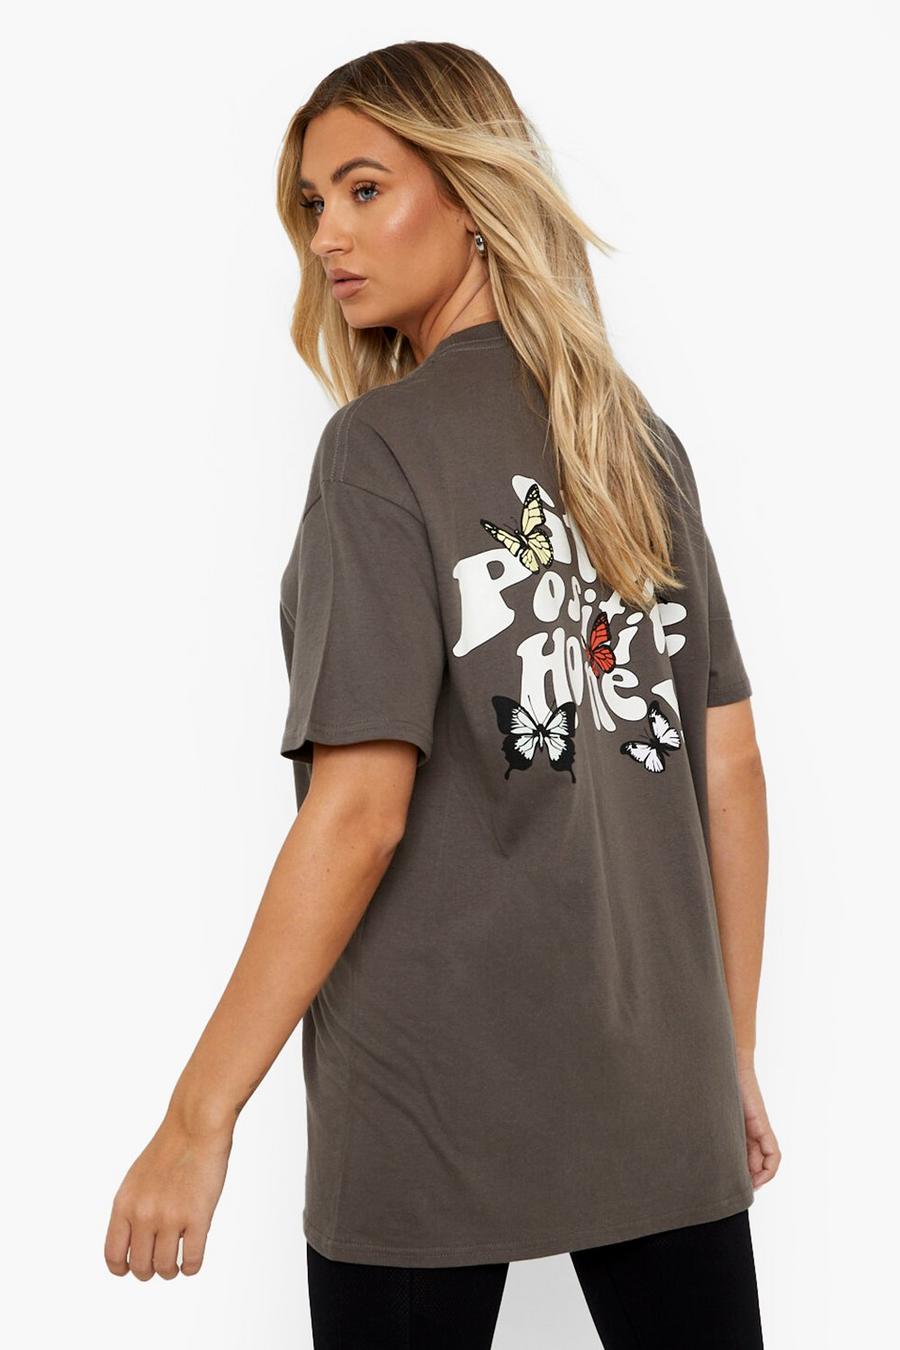 Charcoal grey Oversized Stay Positive Back Graphic T-Shirt image number 1